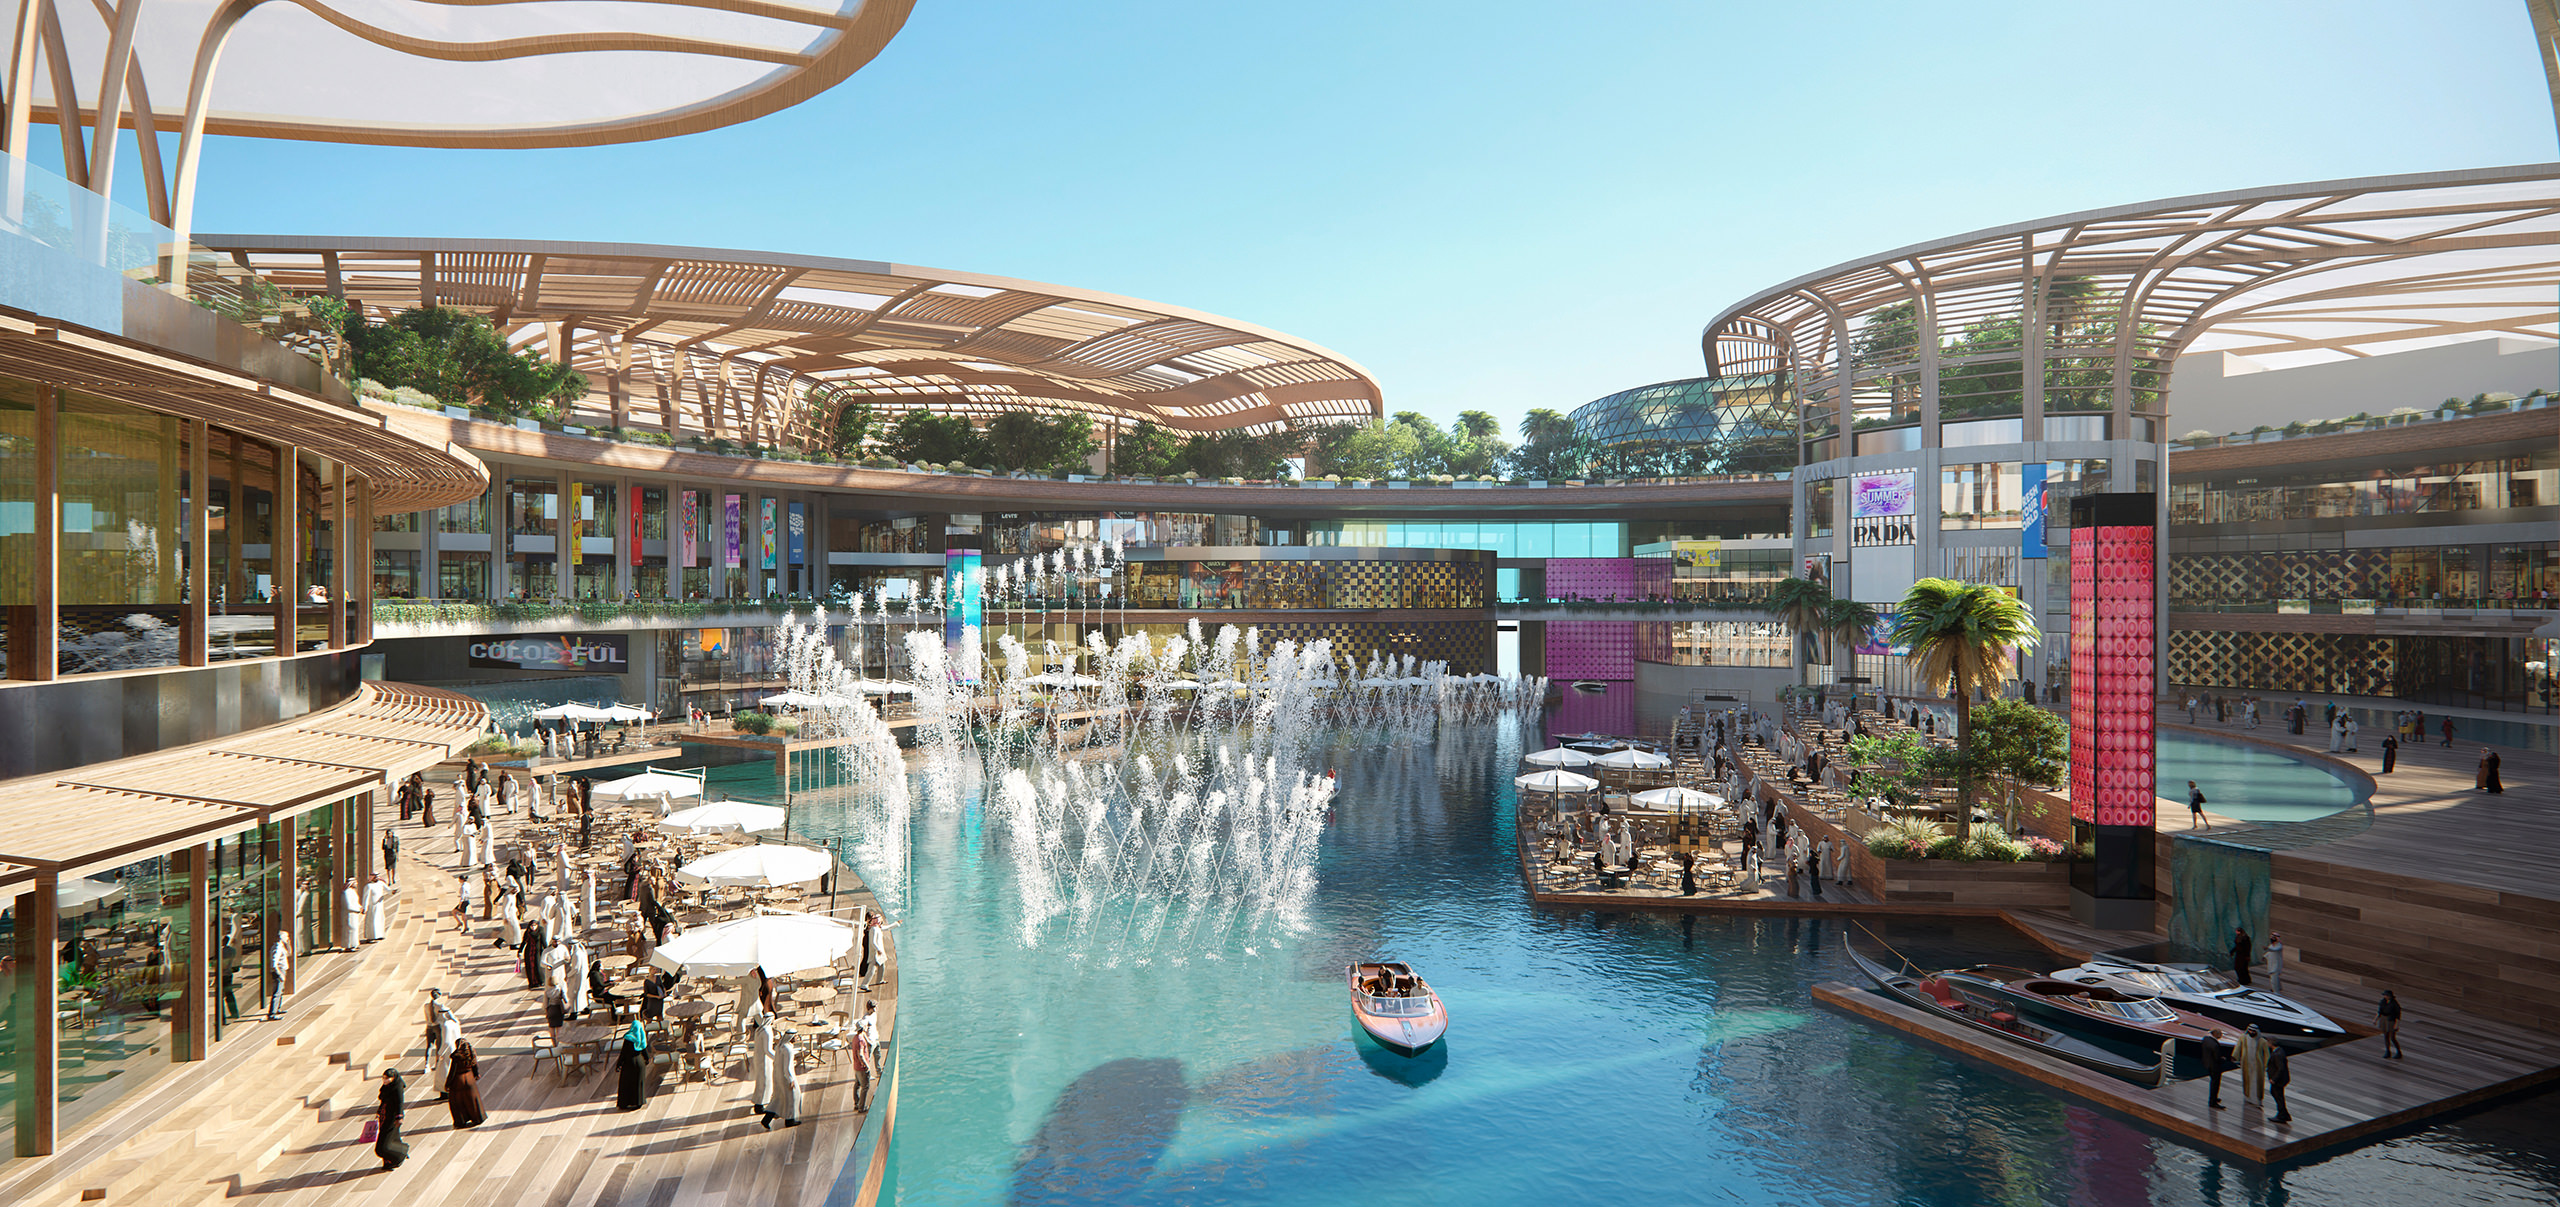 3D visualization of an upscale shopping mall with a patio area on the water with several working fountains in United Arabian Emirates